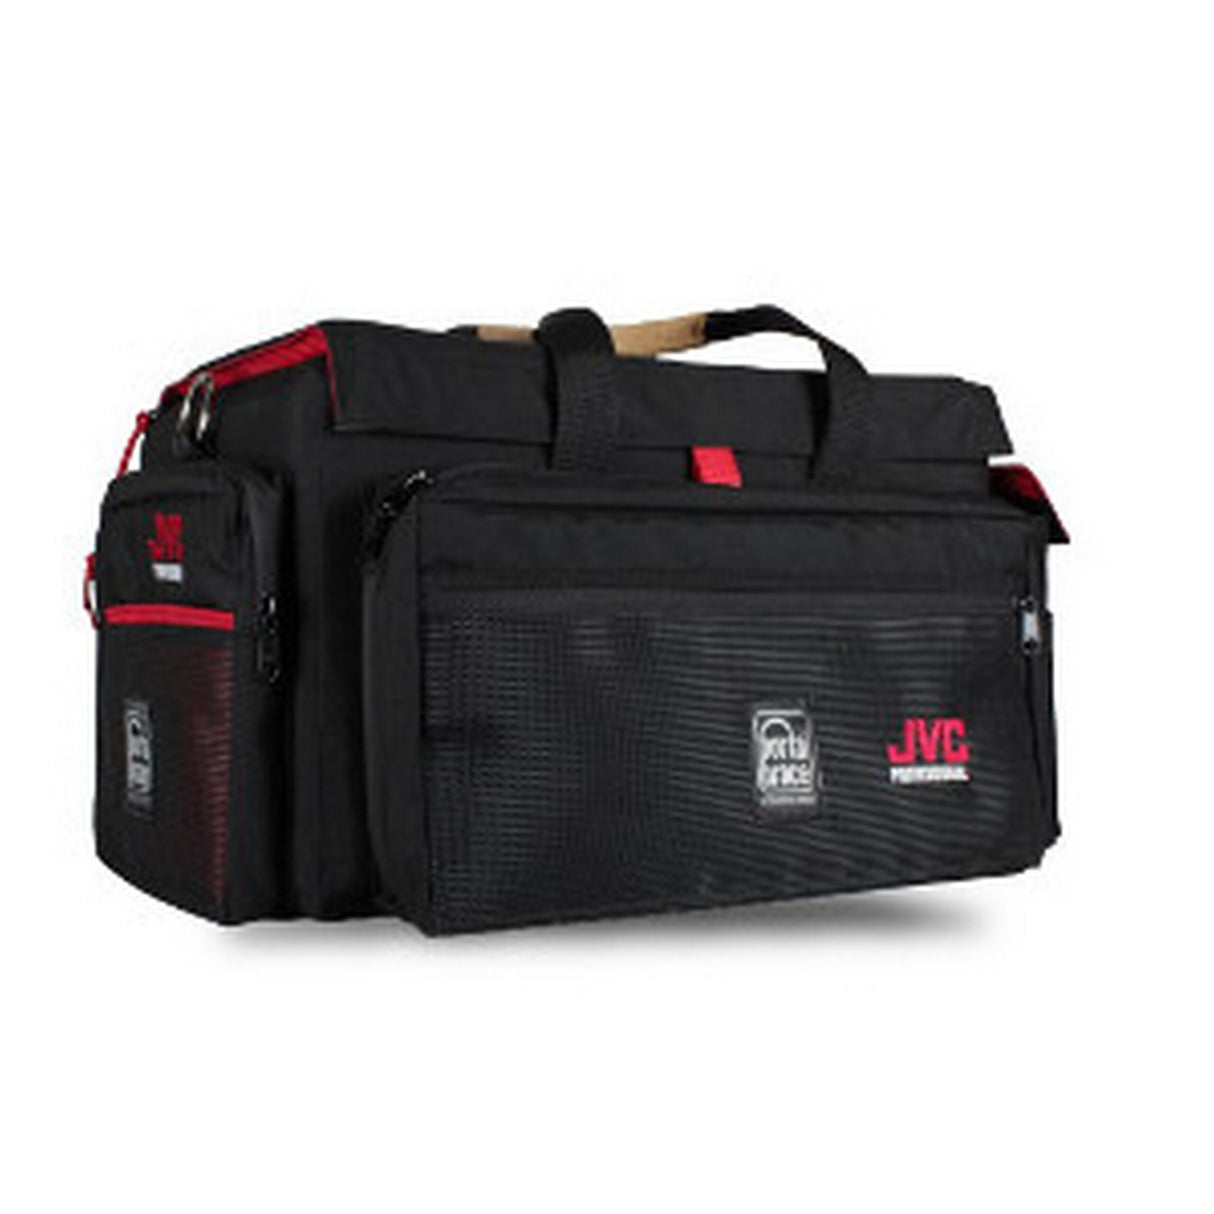 JVC CTC600BSR Soft Carry Case and Rain Cover Kit for GY-HM600 and GY-HM650